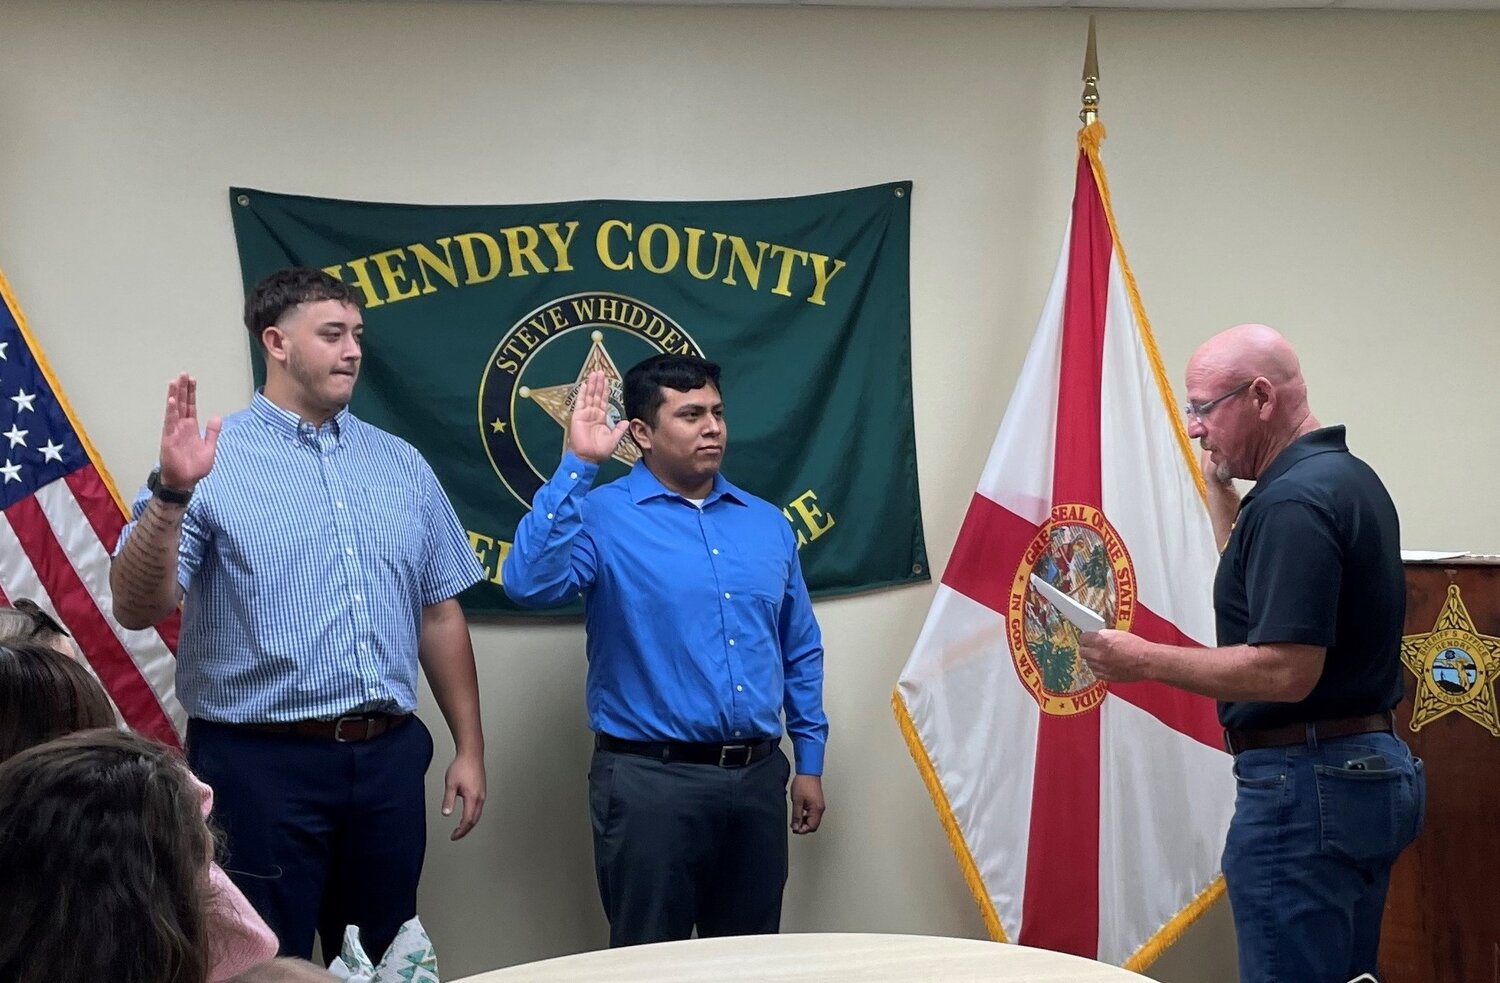 LABELLE -- Two new officers joined Hendry County Sheriff's Office on Nov. 2. Left to right are Deputy D. Blanco, Sheriff Steve Whidden and Deputy Isaac Cadena.